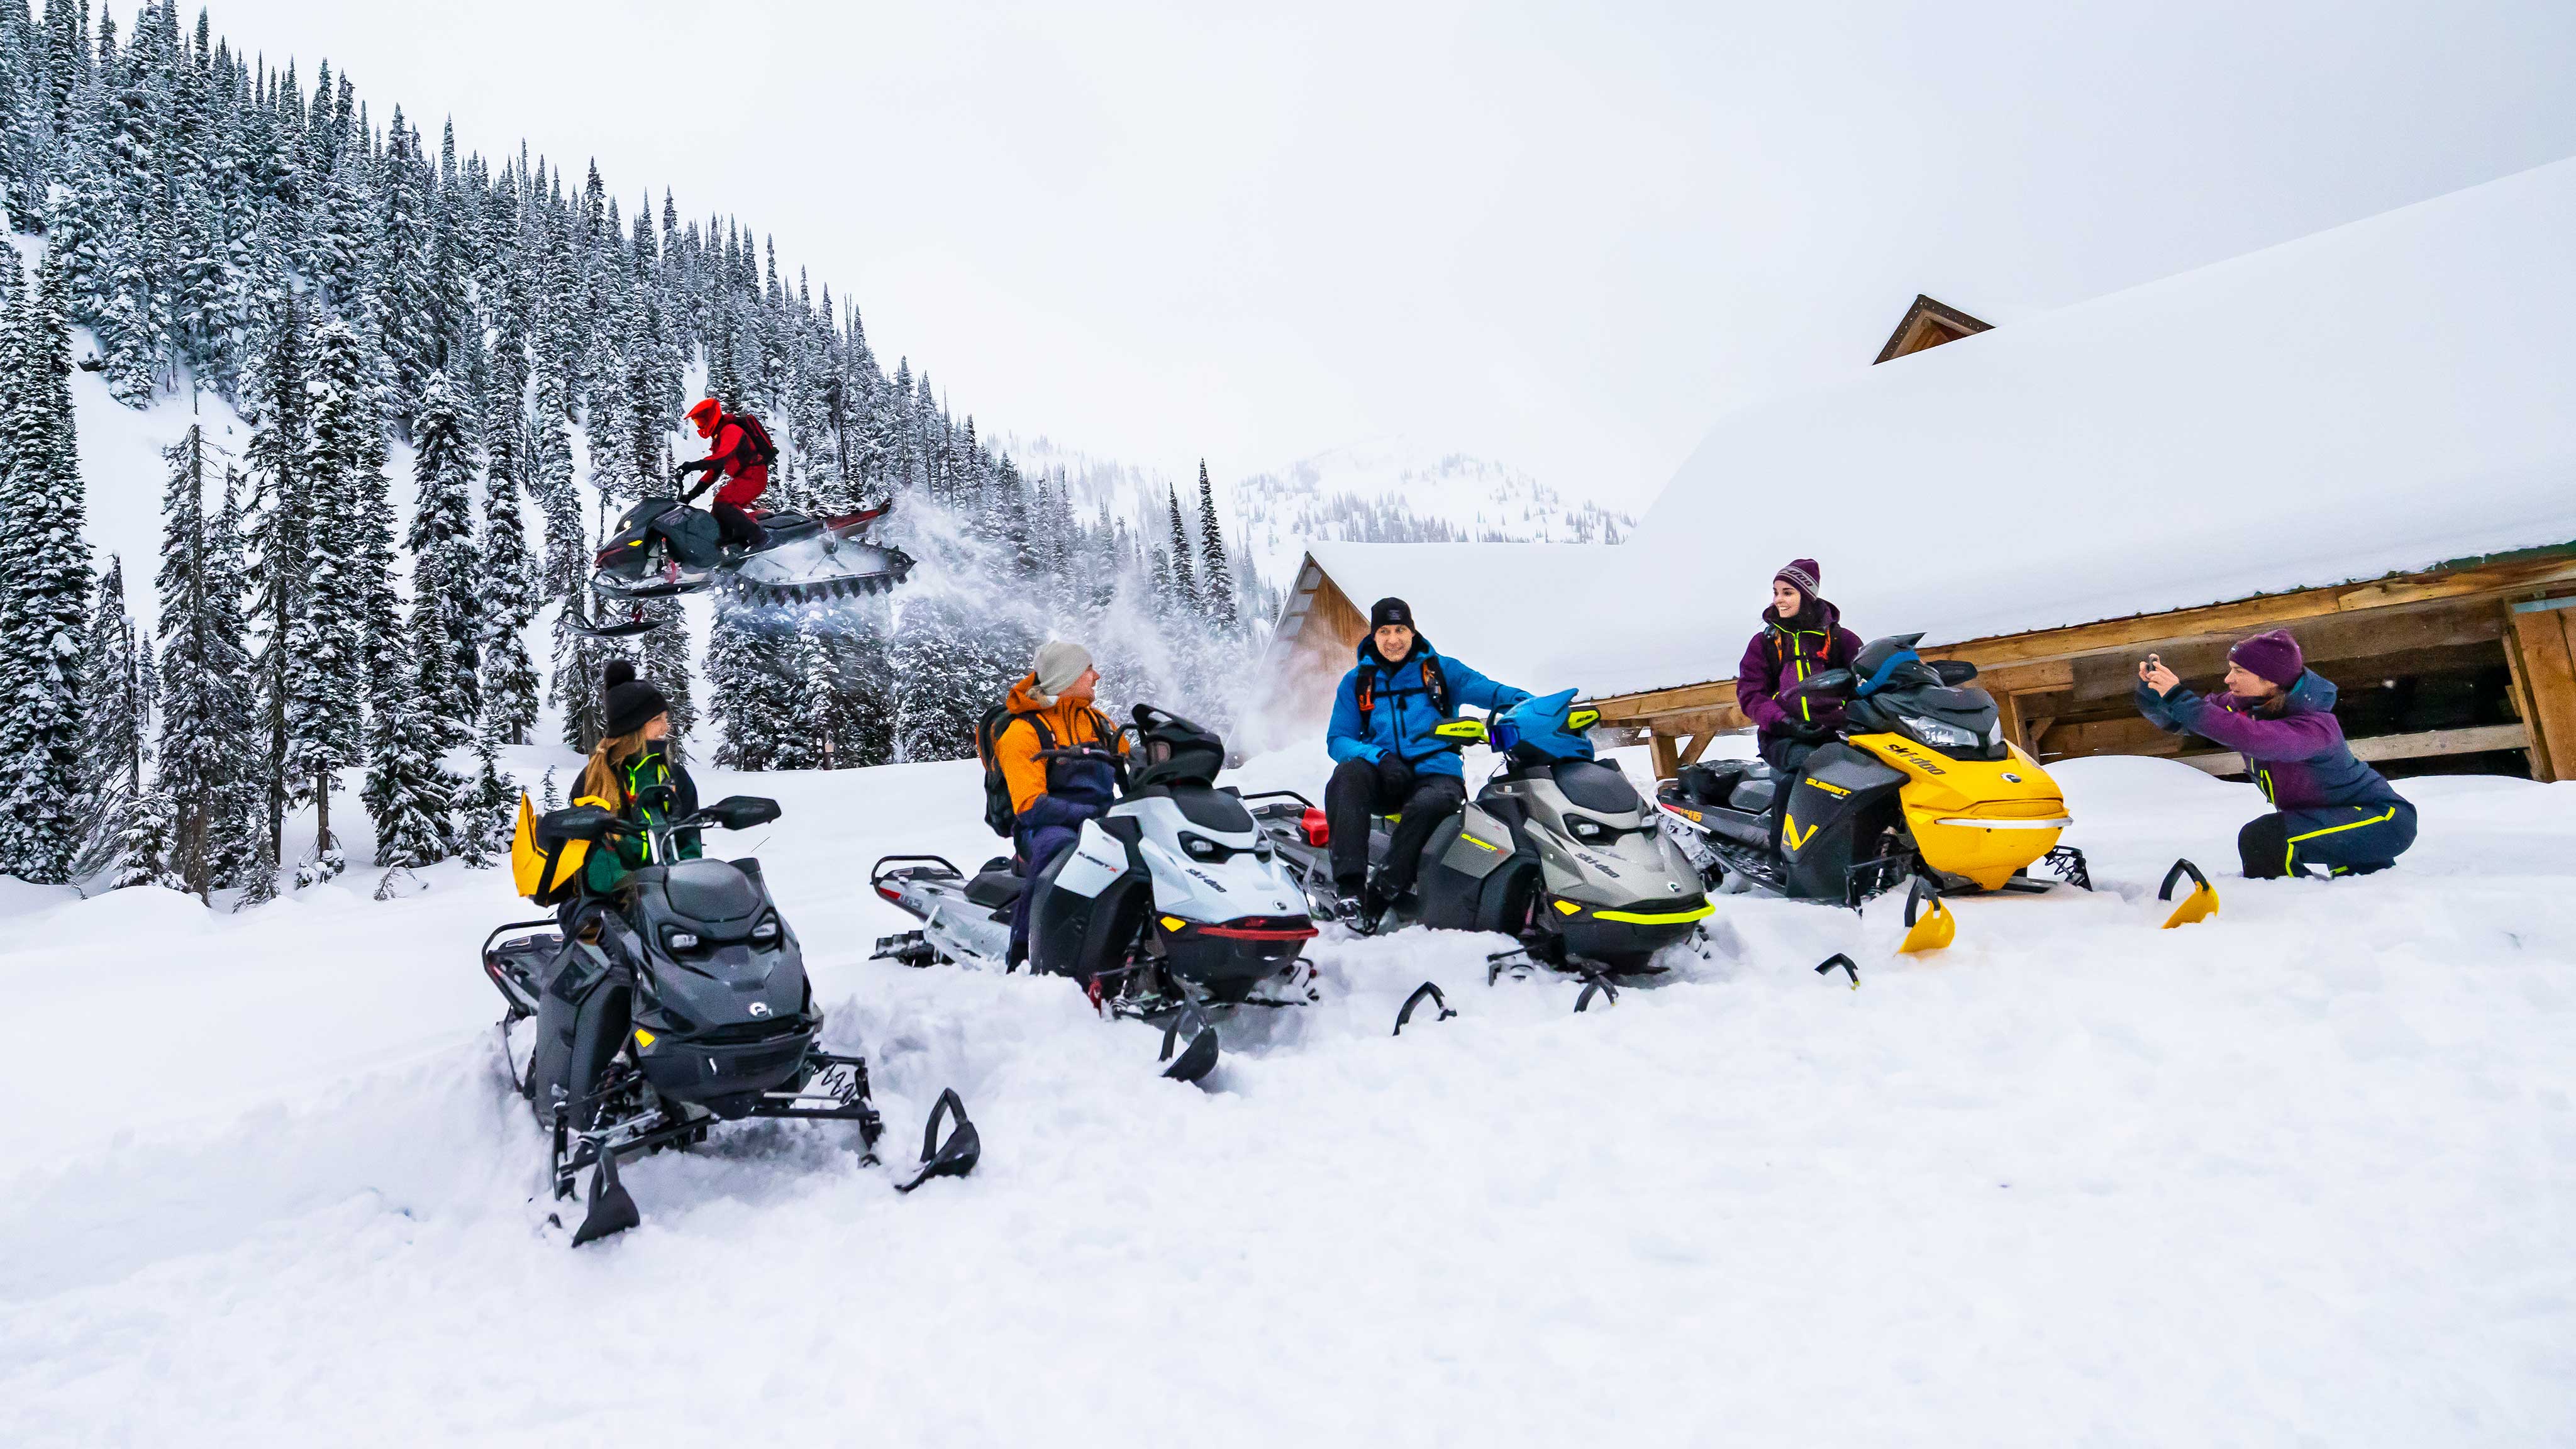 Group of friends enjoying a day on the snow with their Ski-Doo snowmobiles